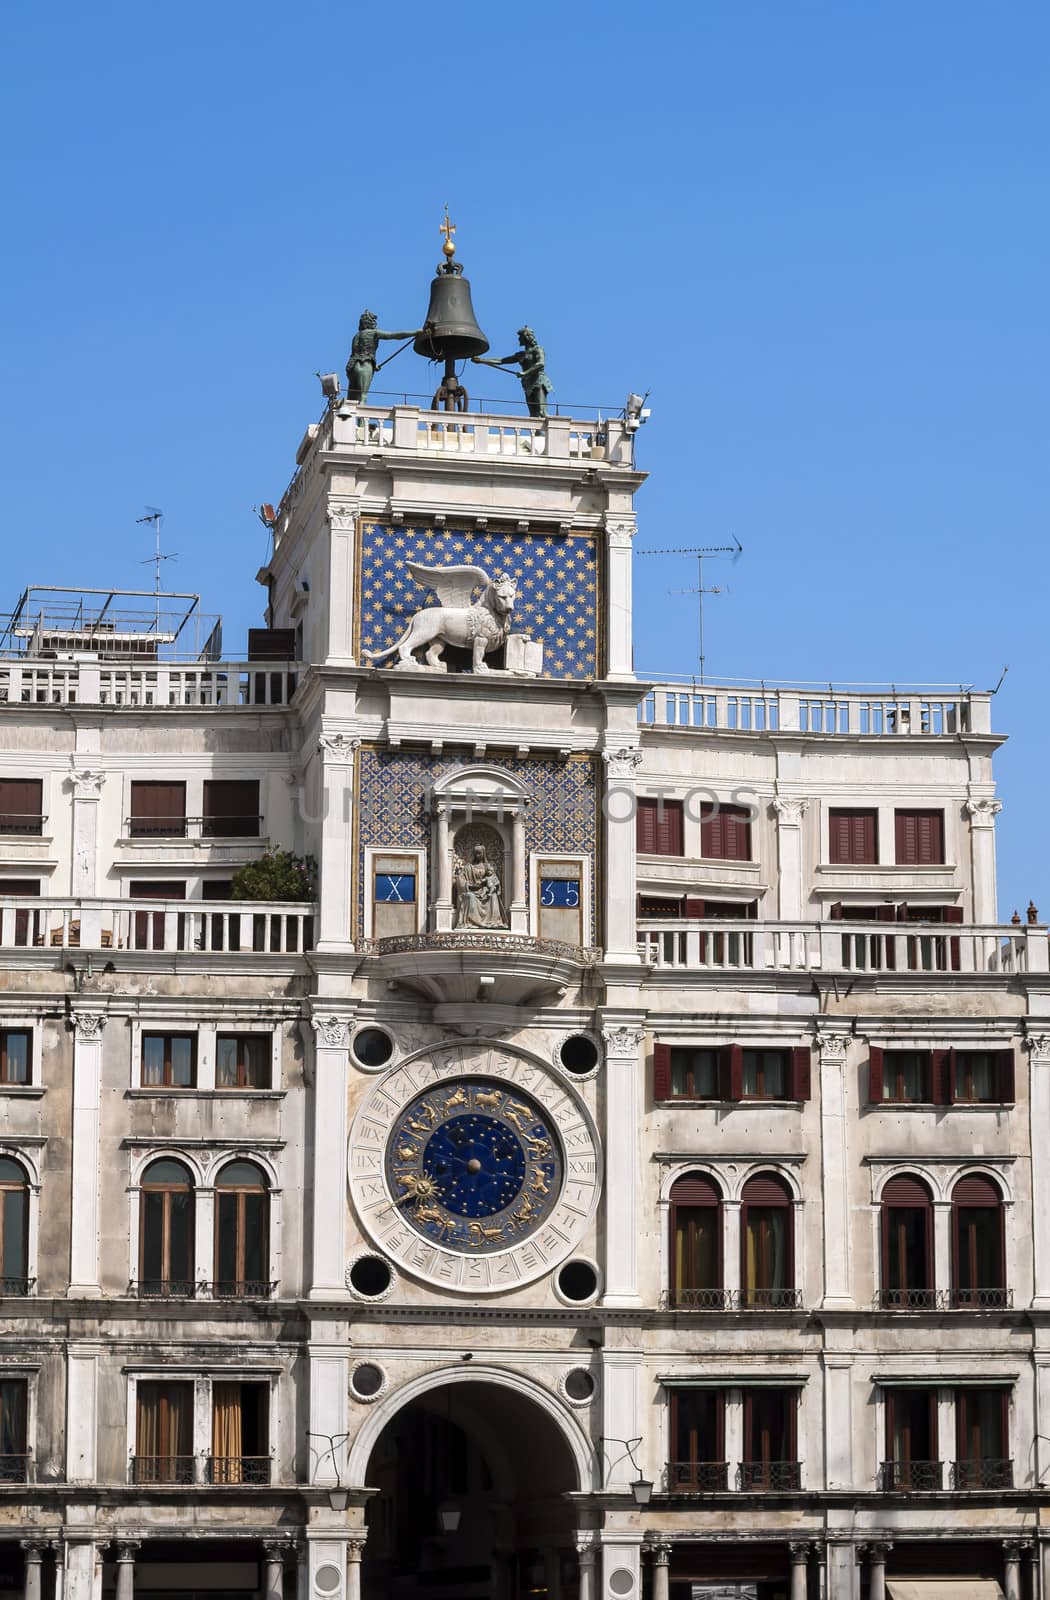 Clock tower building, Venice. by FER737NG